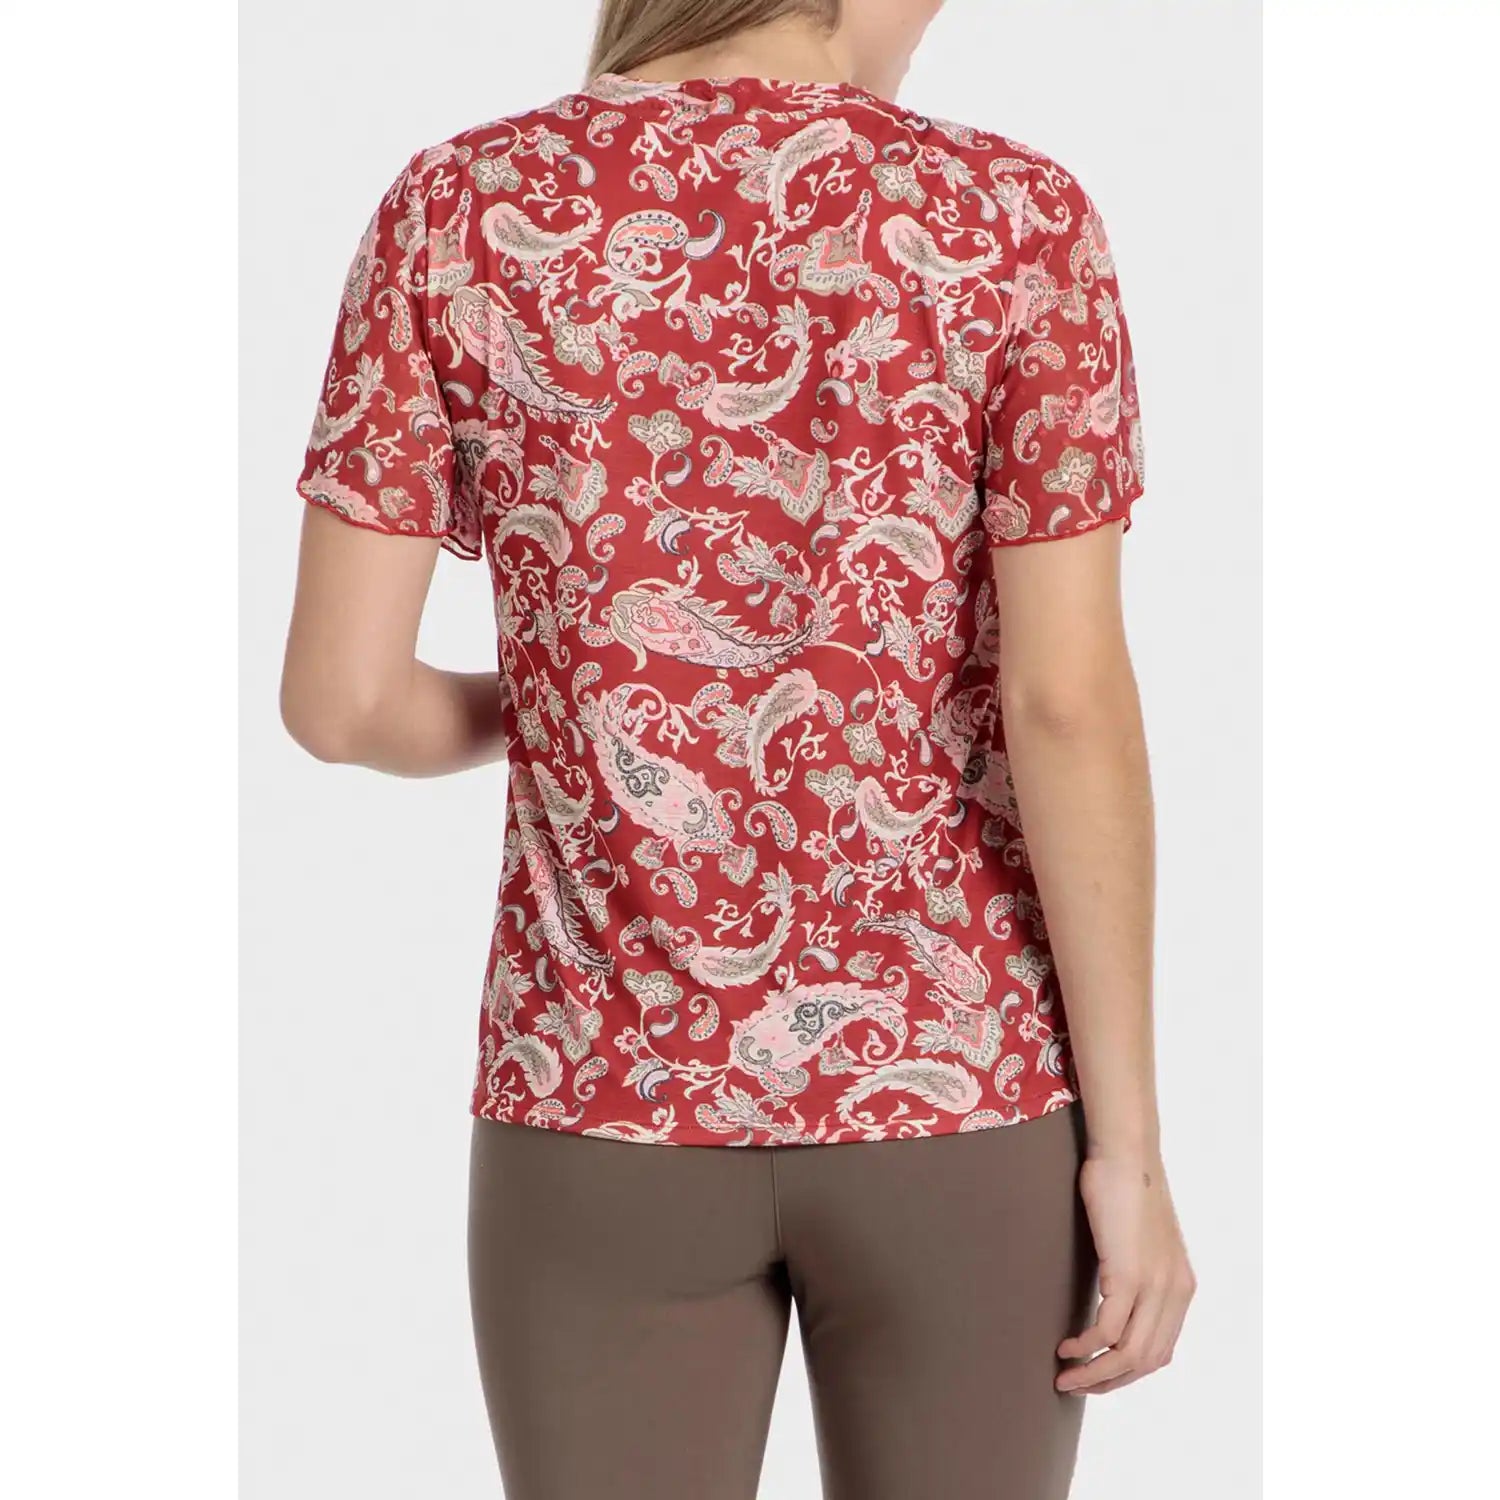 Punt Roma Cashmere Print T-Shirt - Red 2 Shaws Department Stores